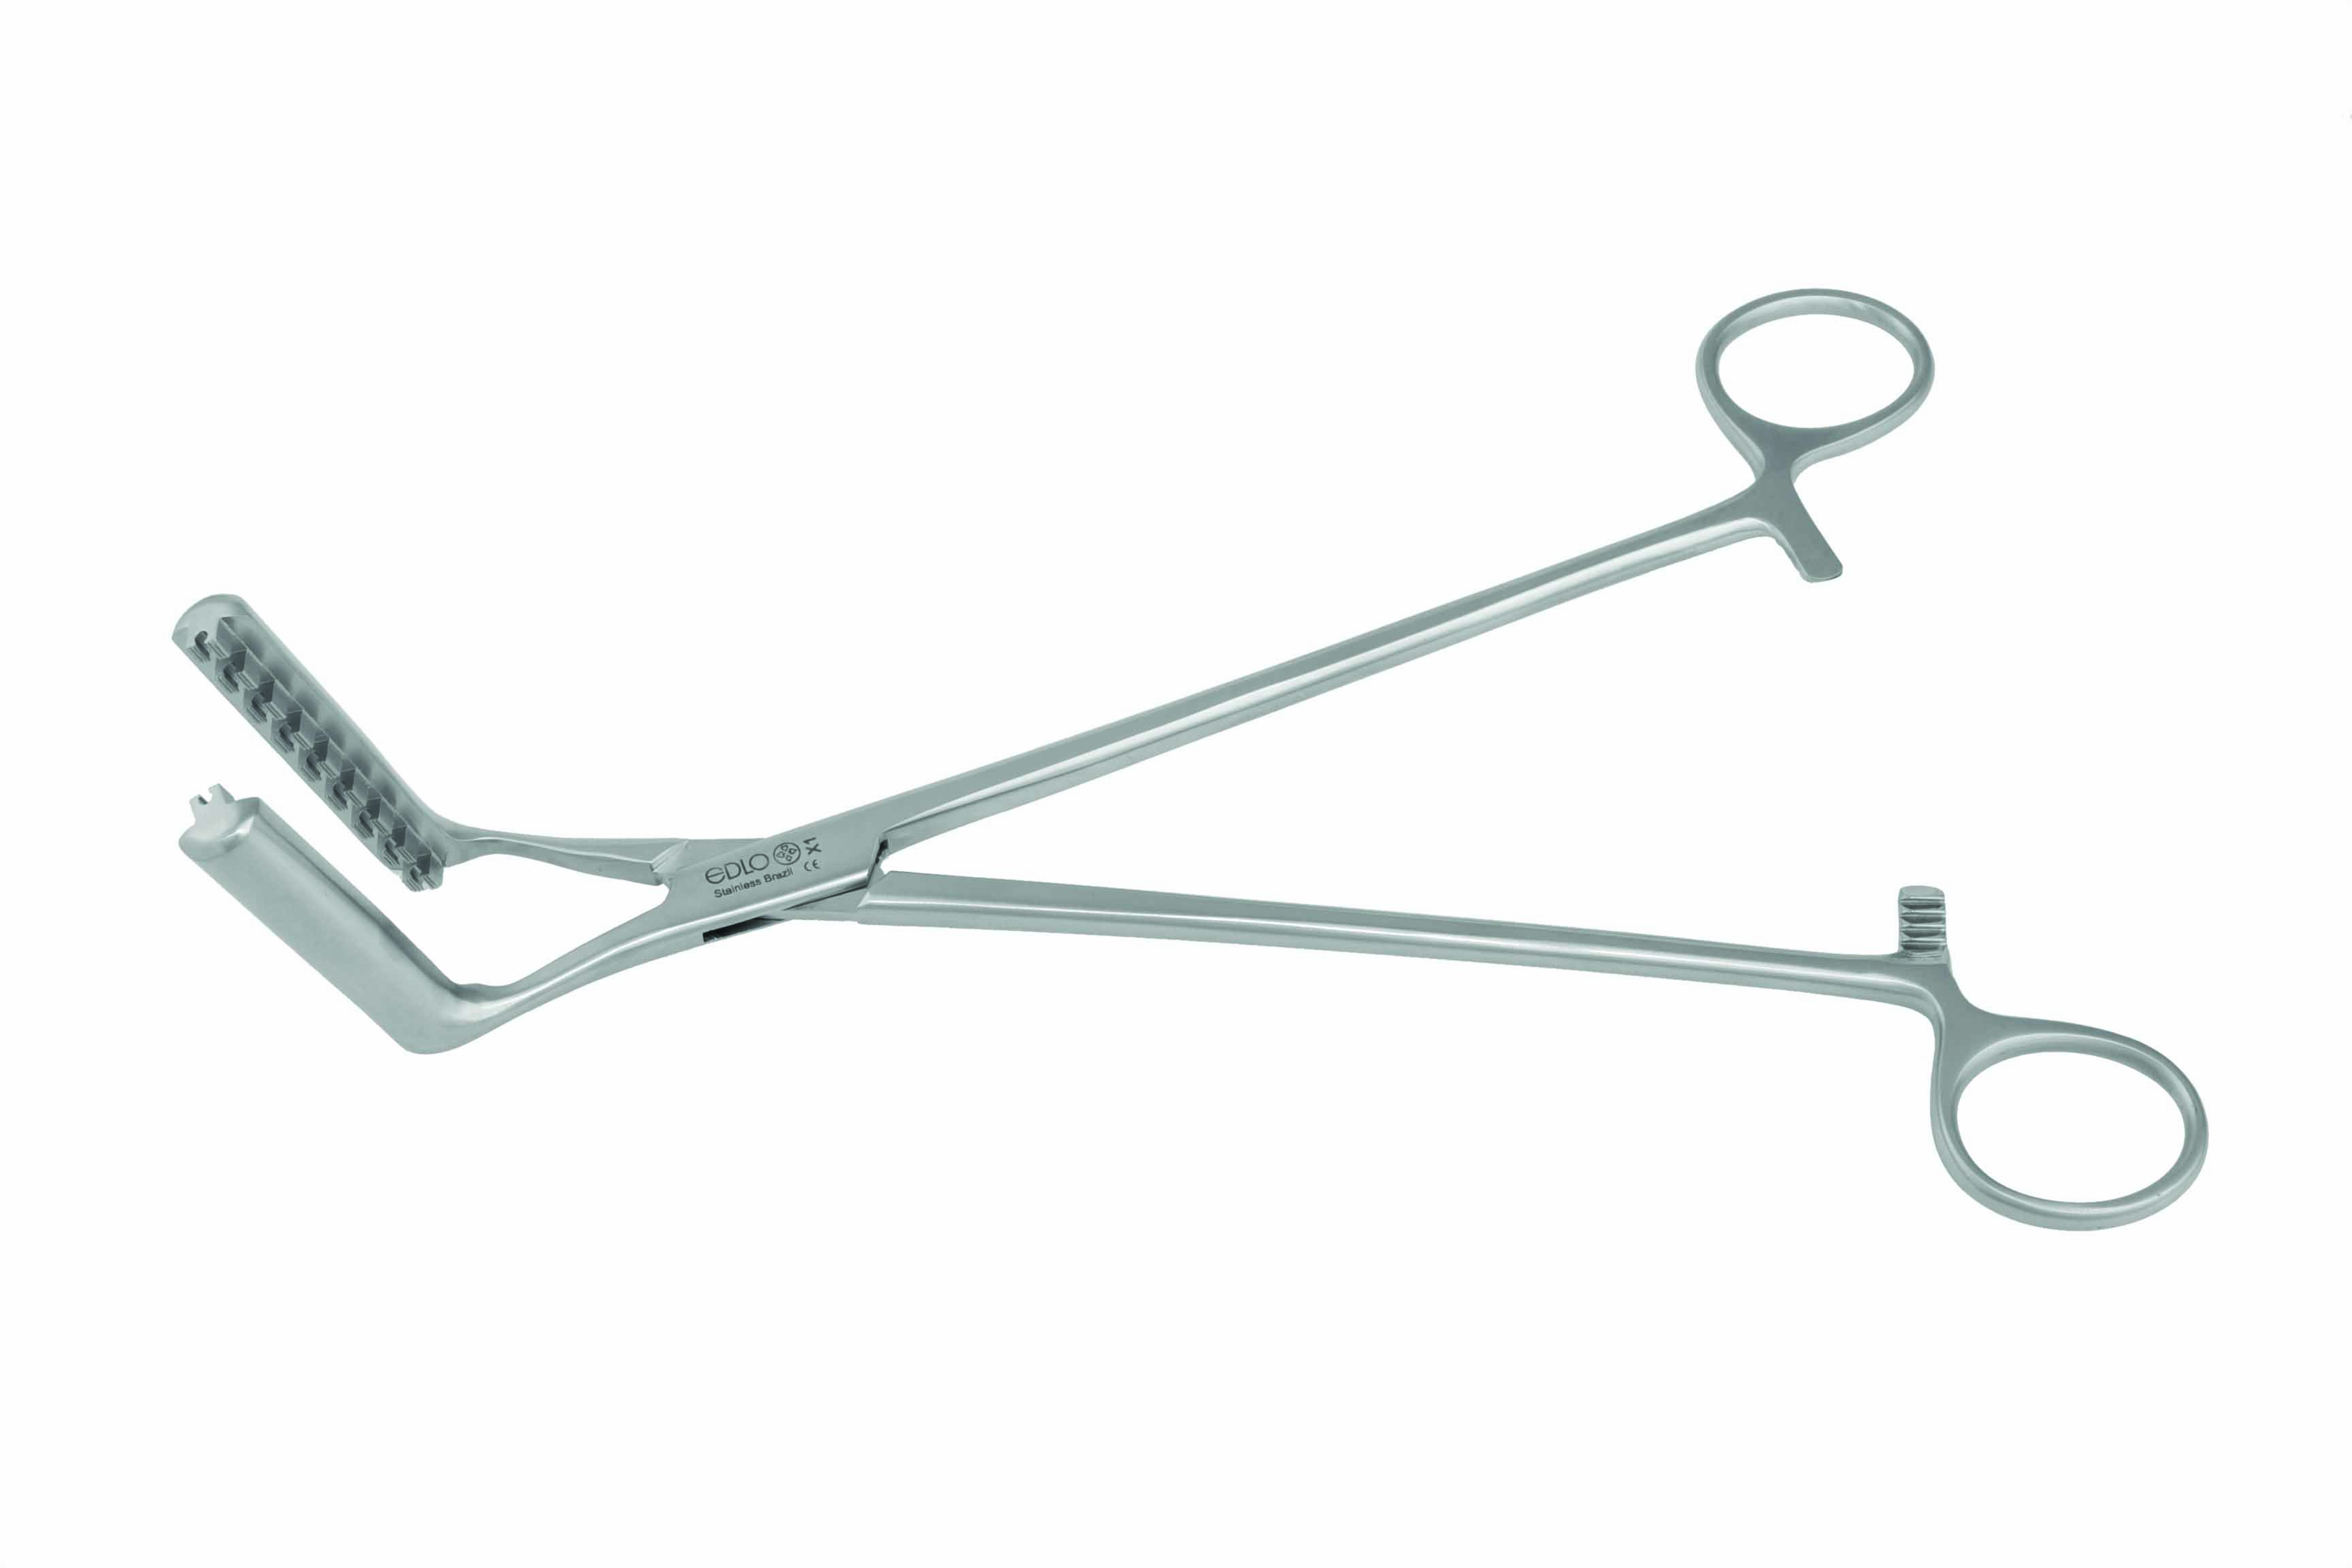 How to Use a purse string suture during surgery « First Aid :: WonderHowTo